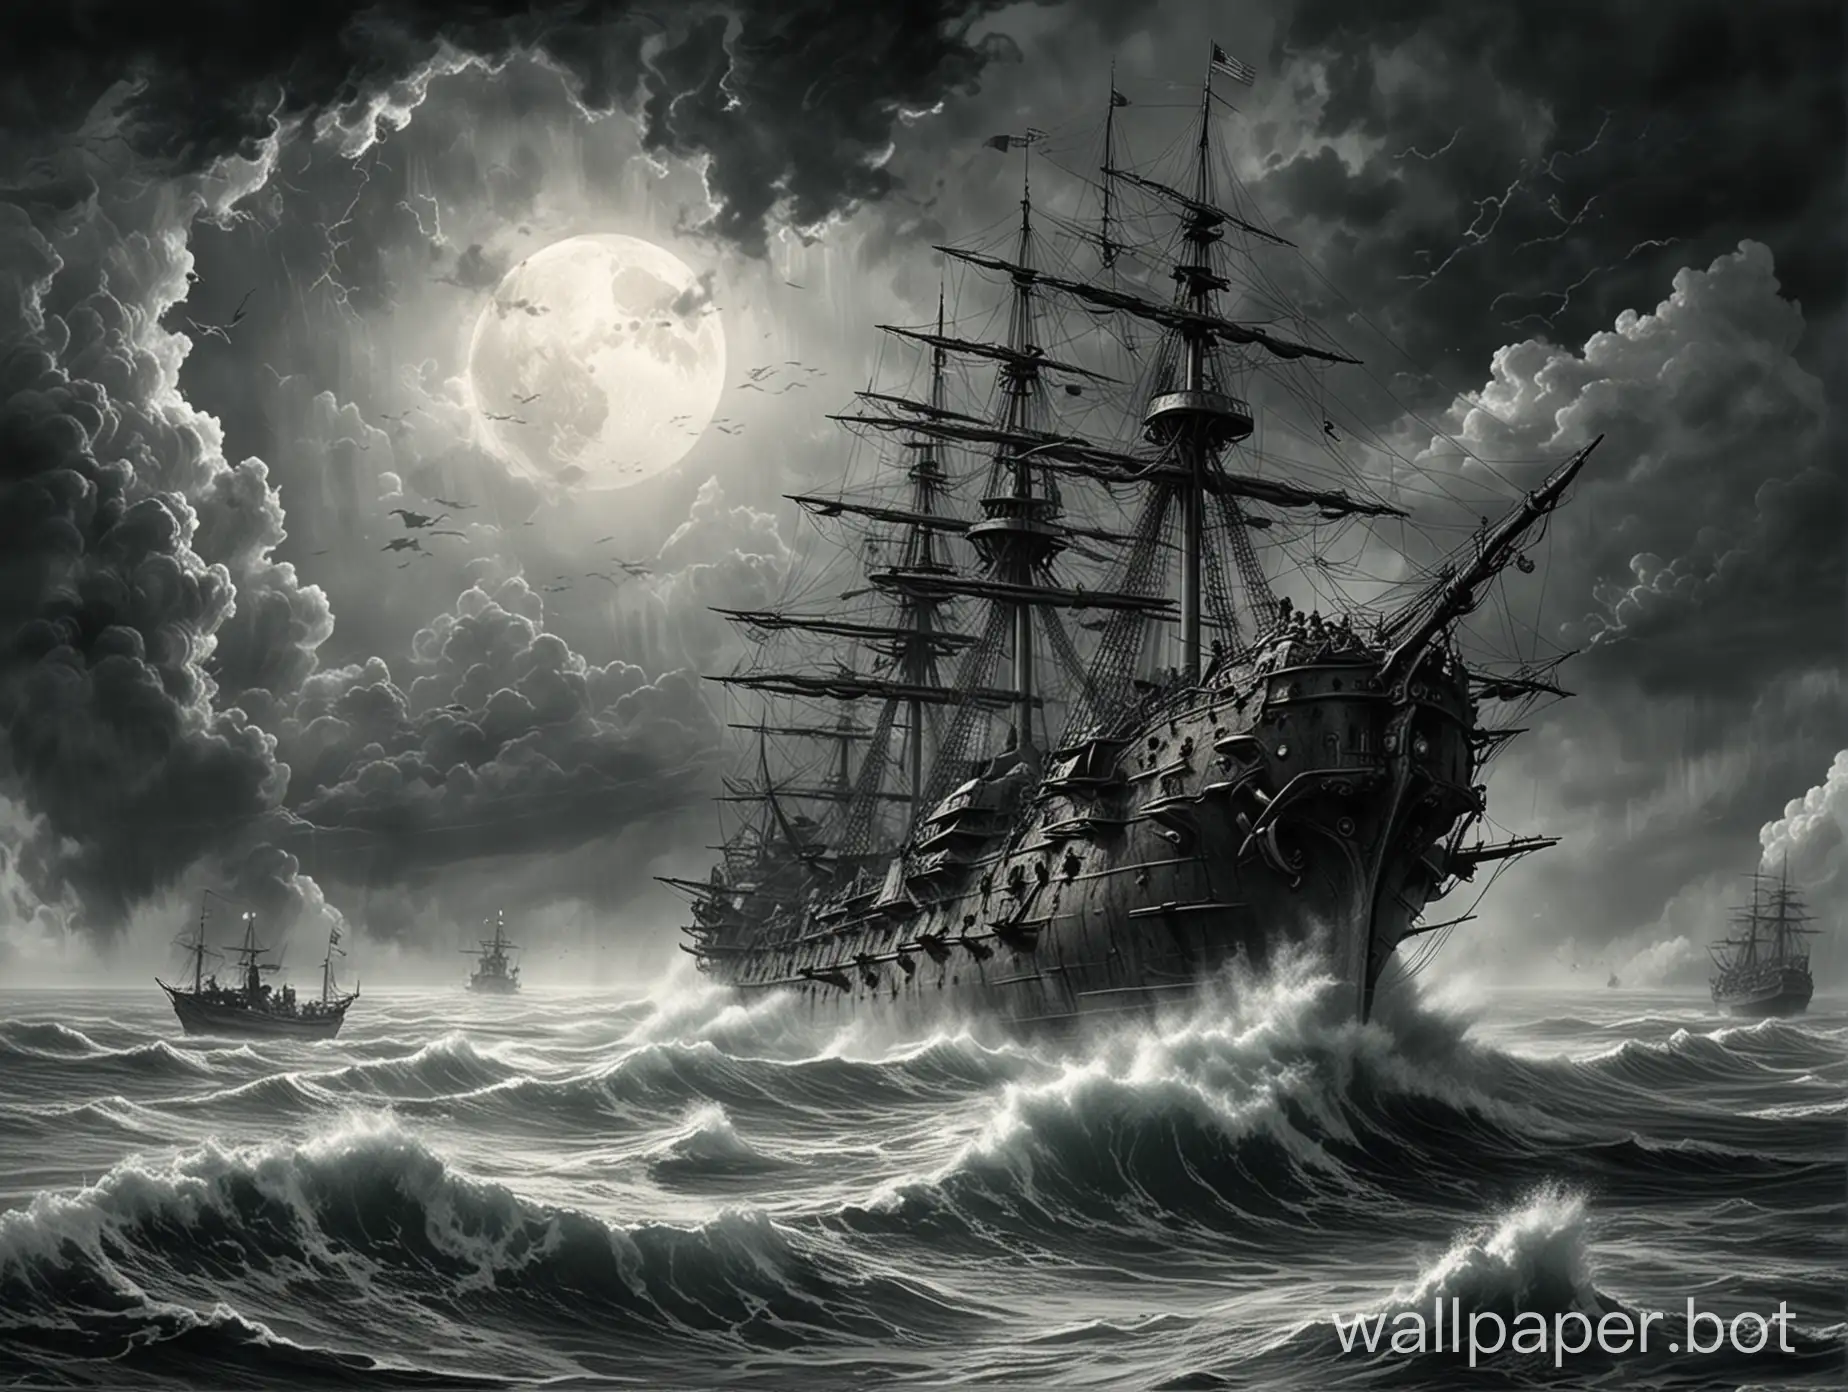 Epic-Sea-Battle-of-Armored-Ships-in-a-Stormy-Moonlit-Night-High-Resolution-Pencil-Sketch-by-Luis-Royo